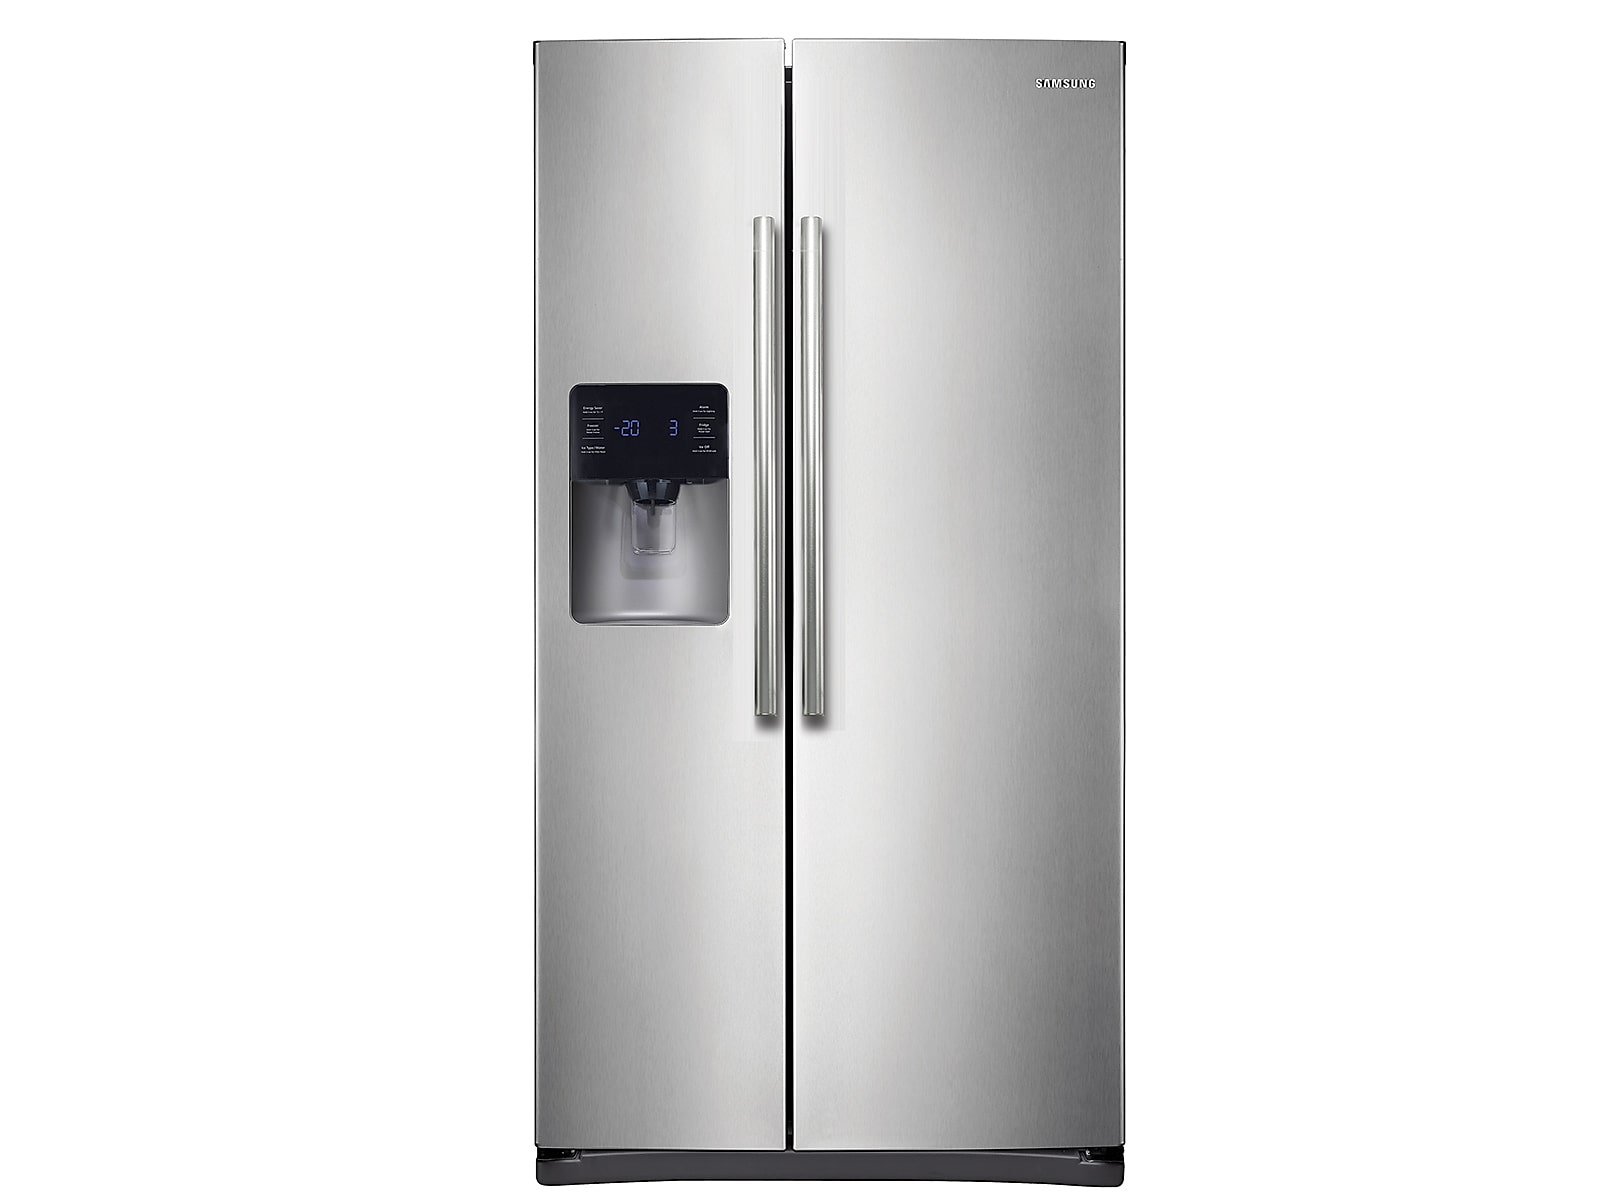 Samsung 25 cu. ft. Side-by-Side Refrigerator with In-Door Ice Maker in Stainless Steel(RS25H5111SR/AA) photo